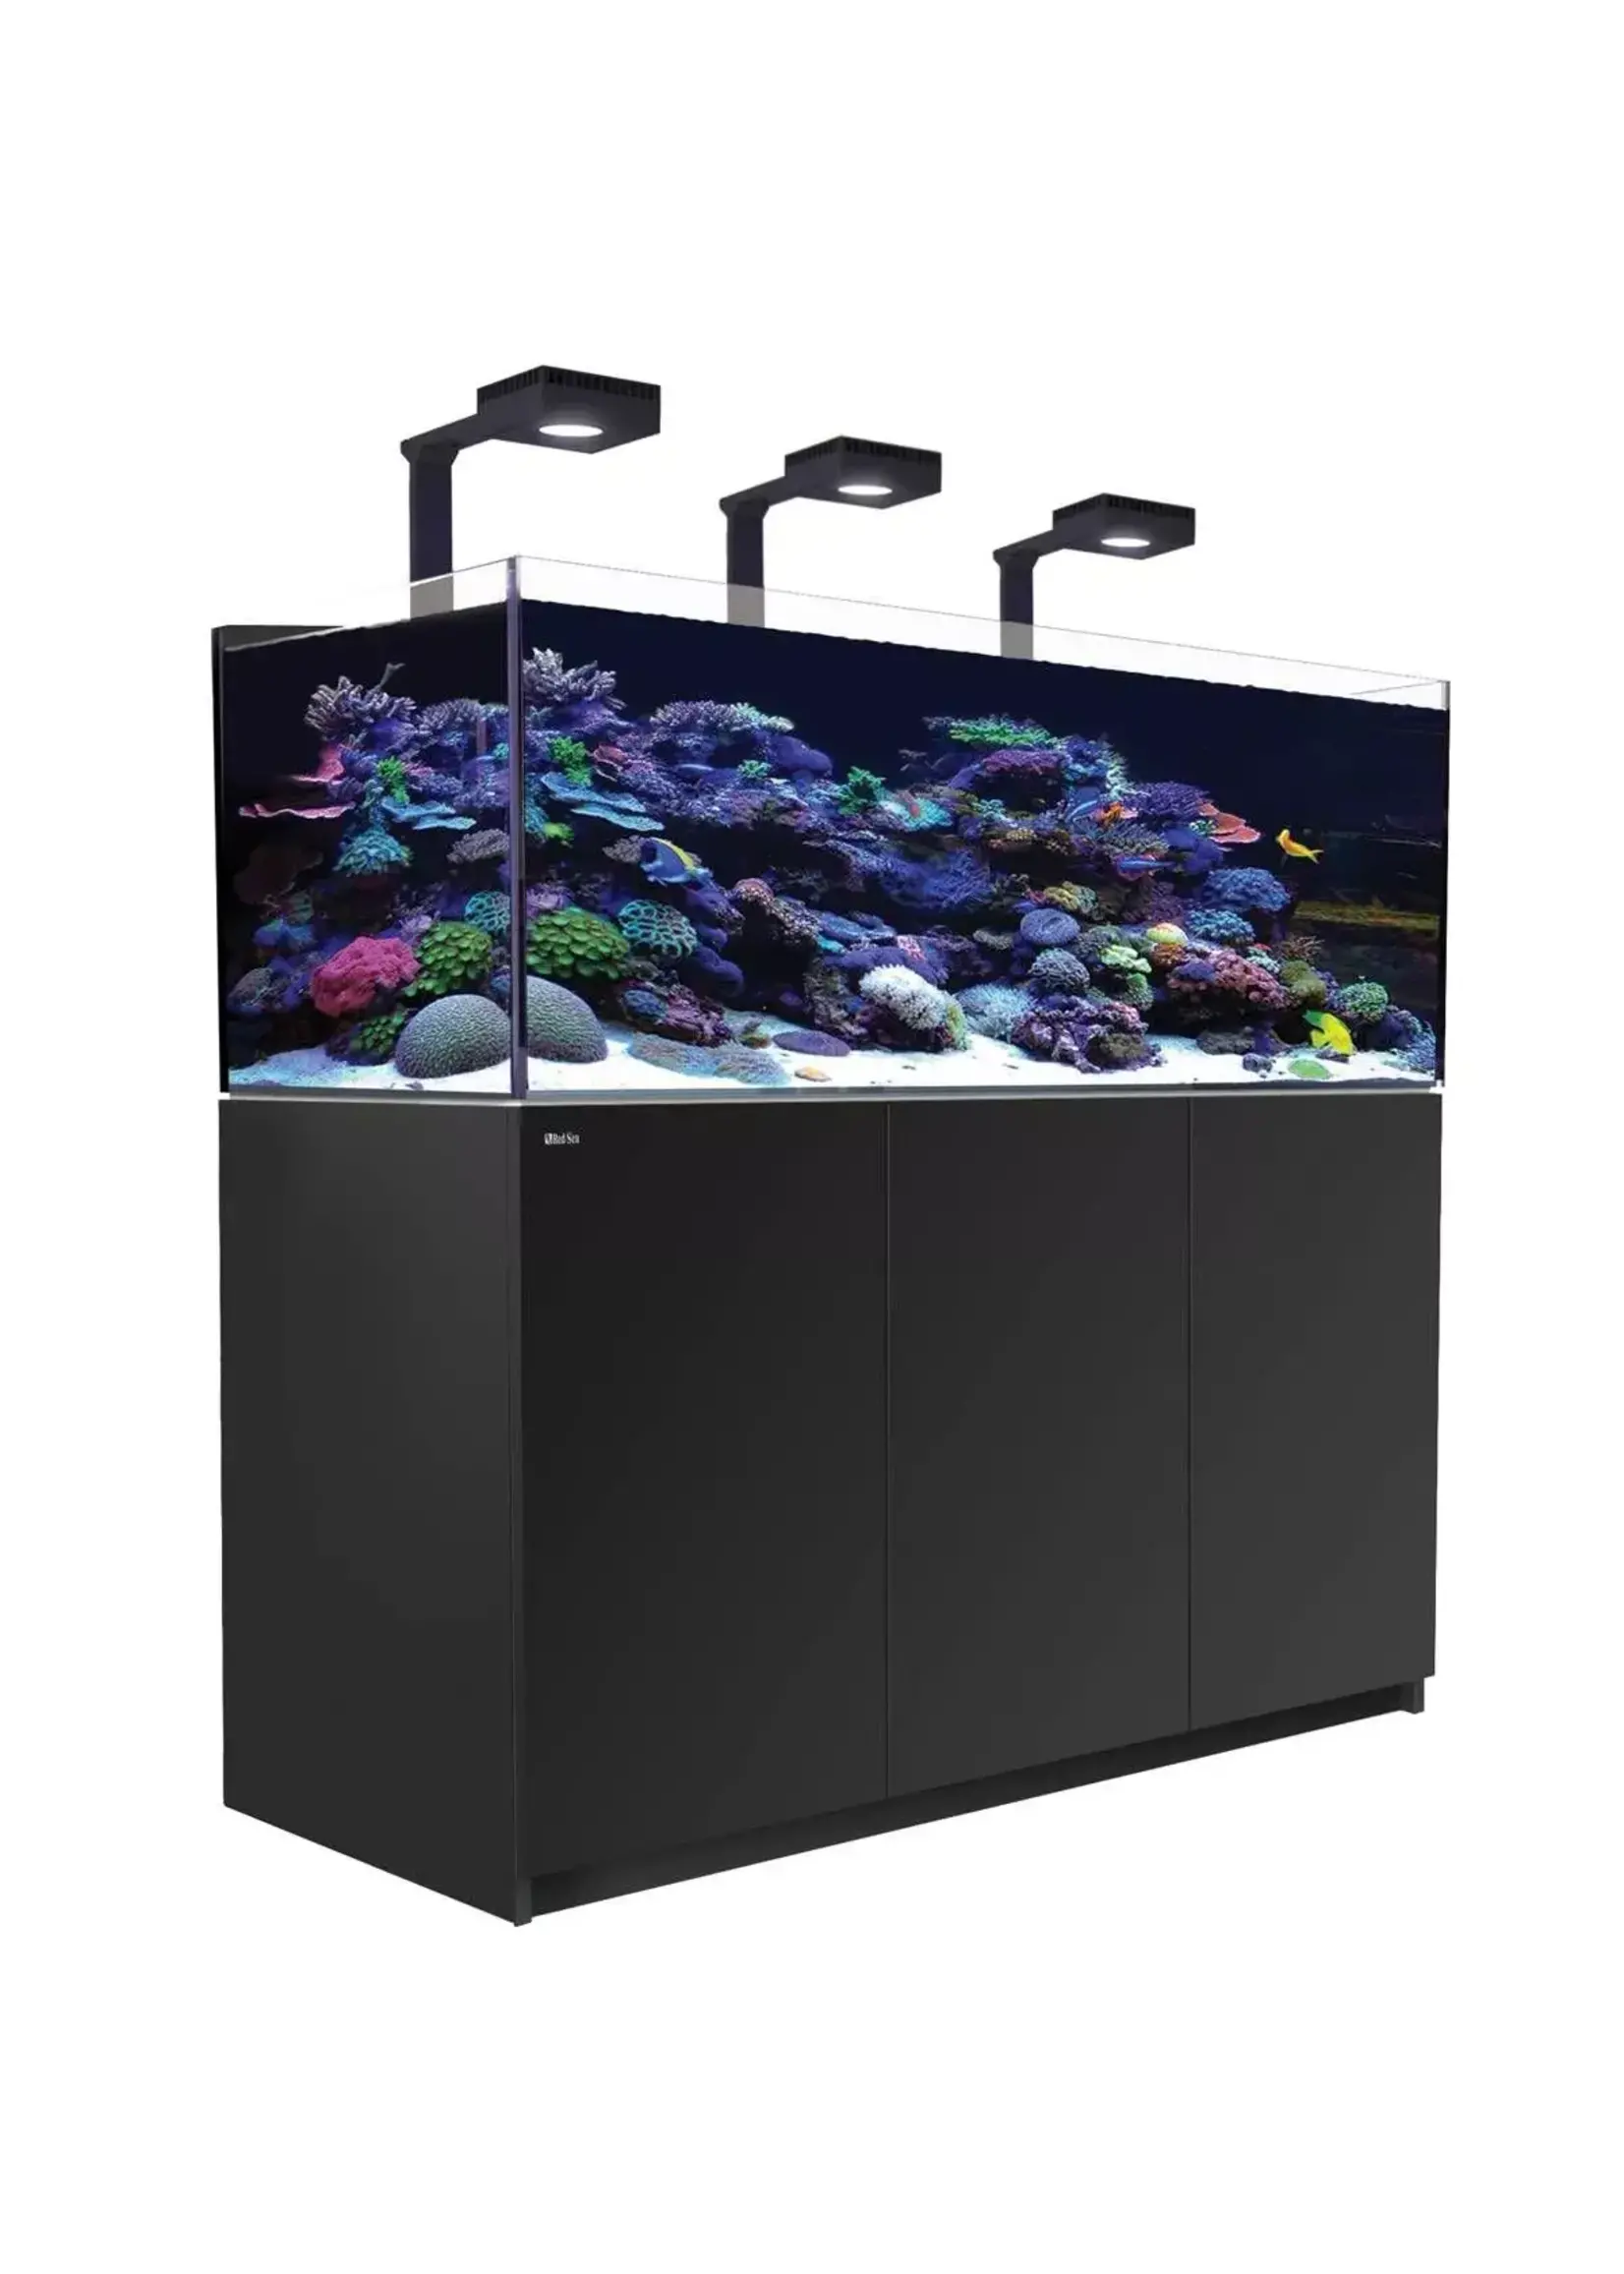 Red Sea REEFER 525 G2 + 112 G DELUXE INCL. 3 X RL 90 & ARMS BLACK